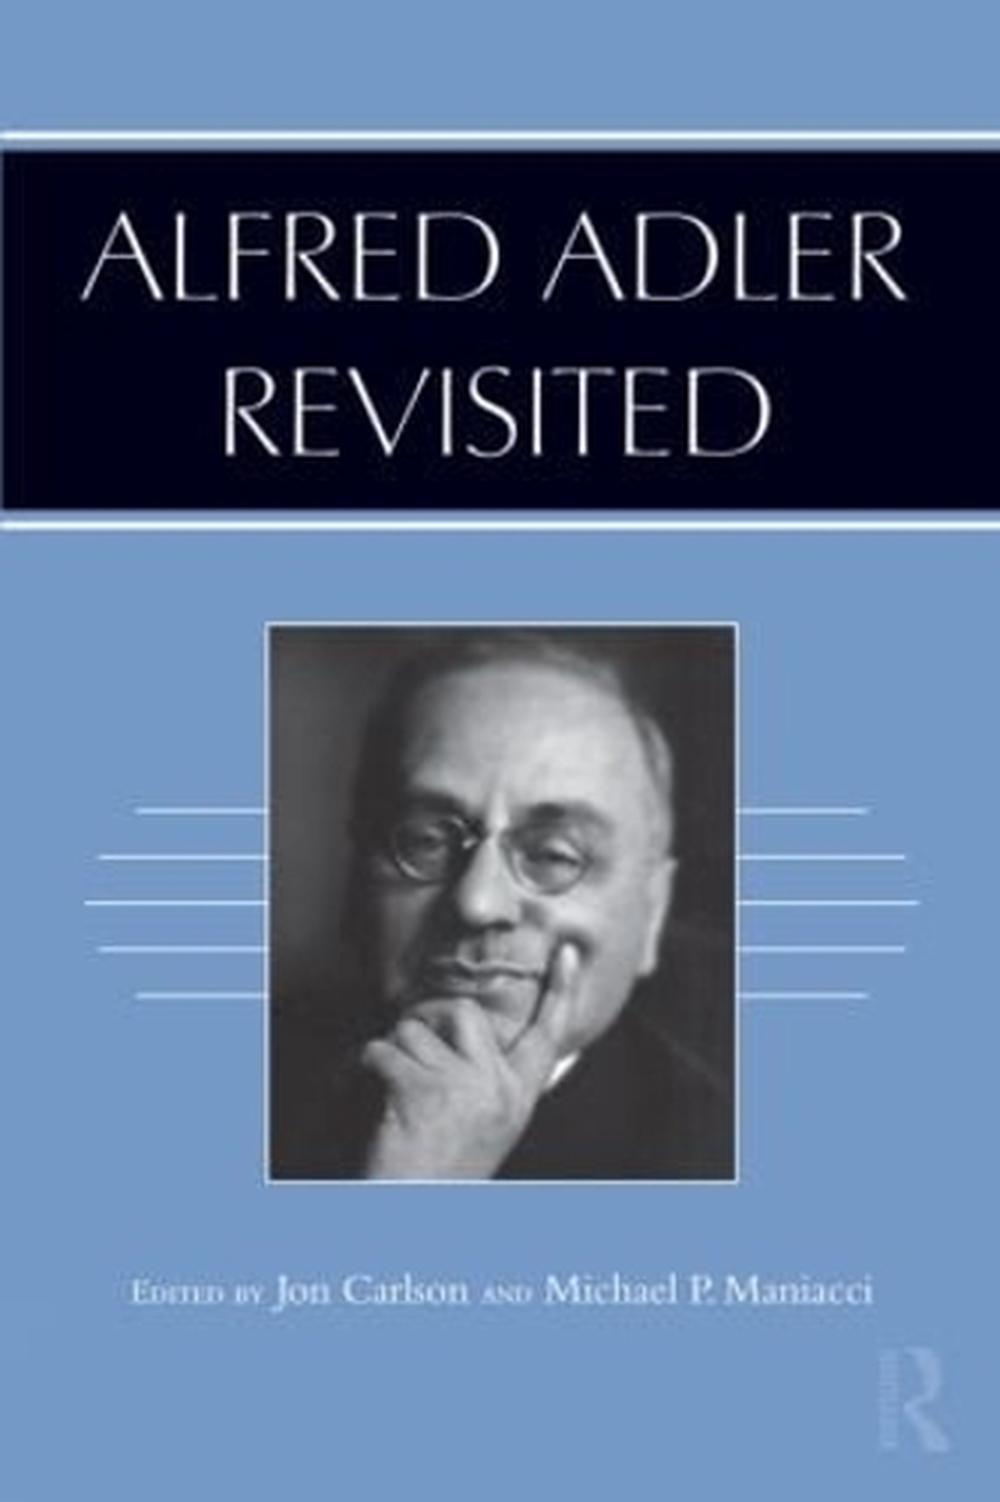 how to read a book j adler